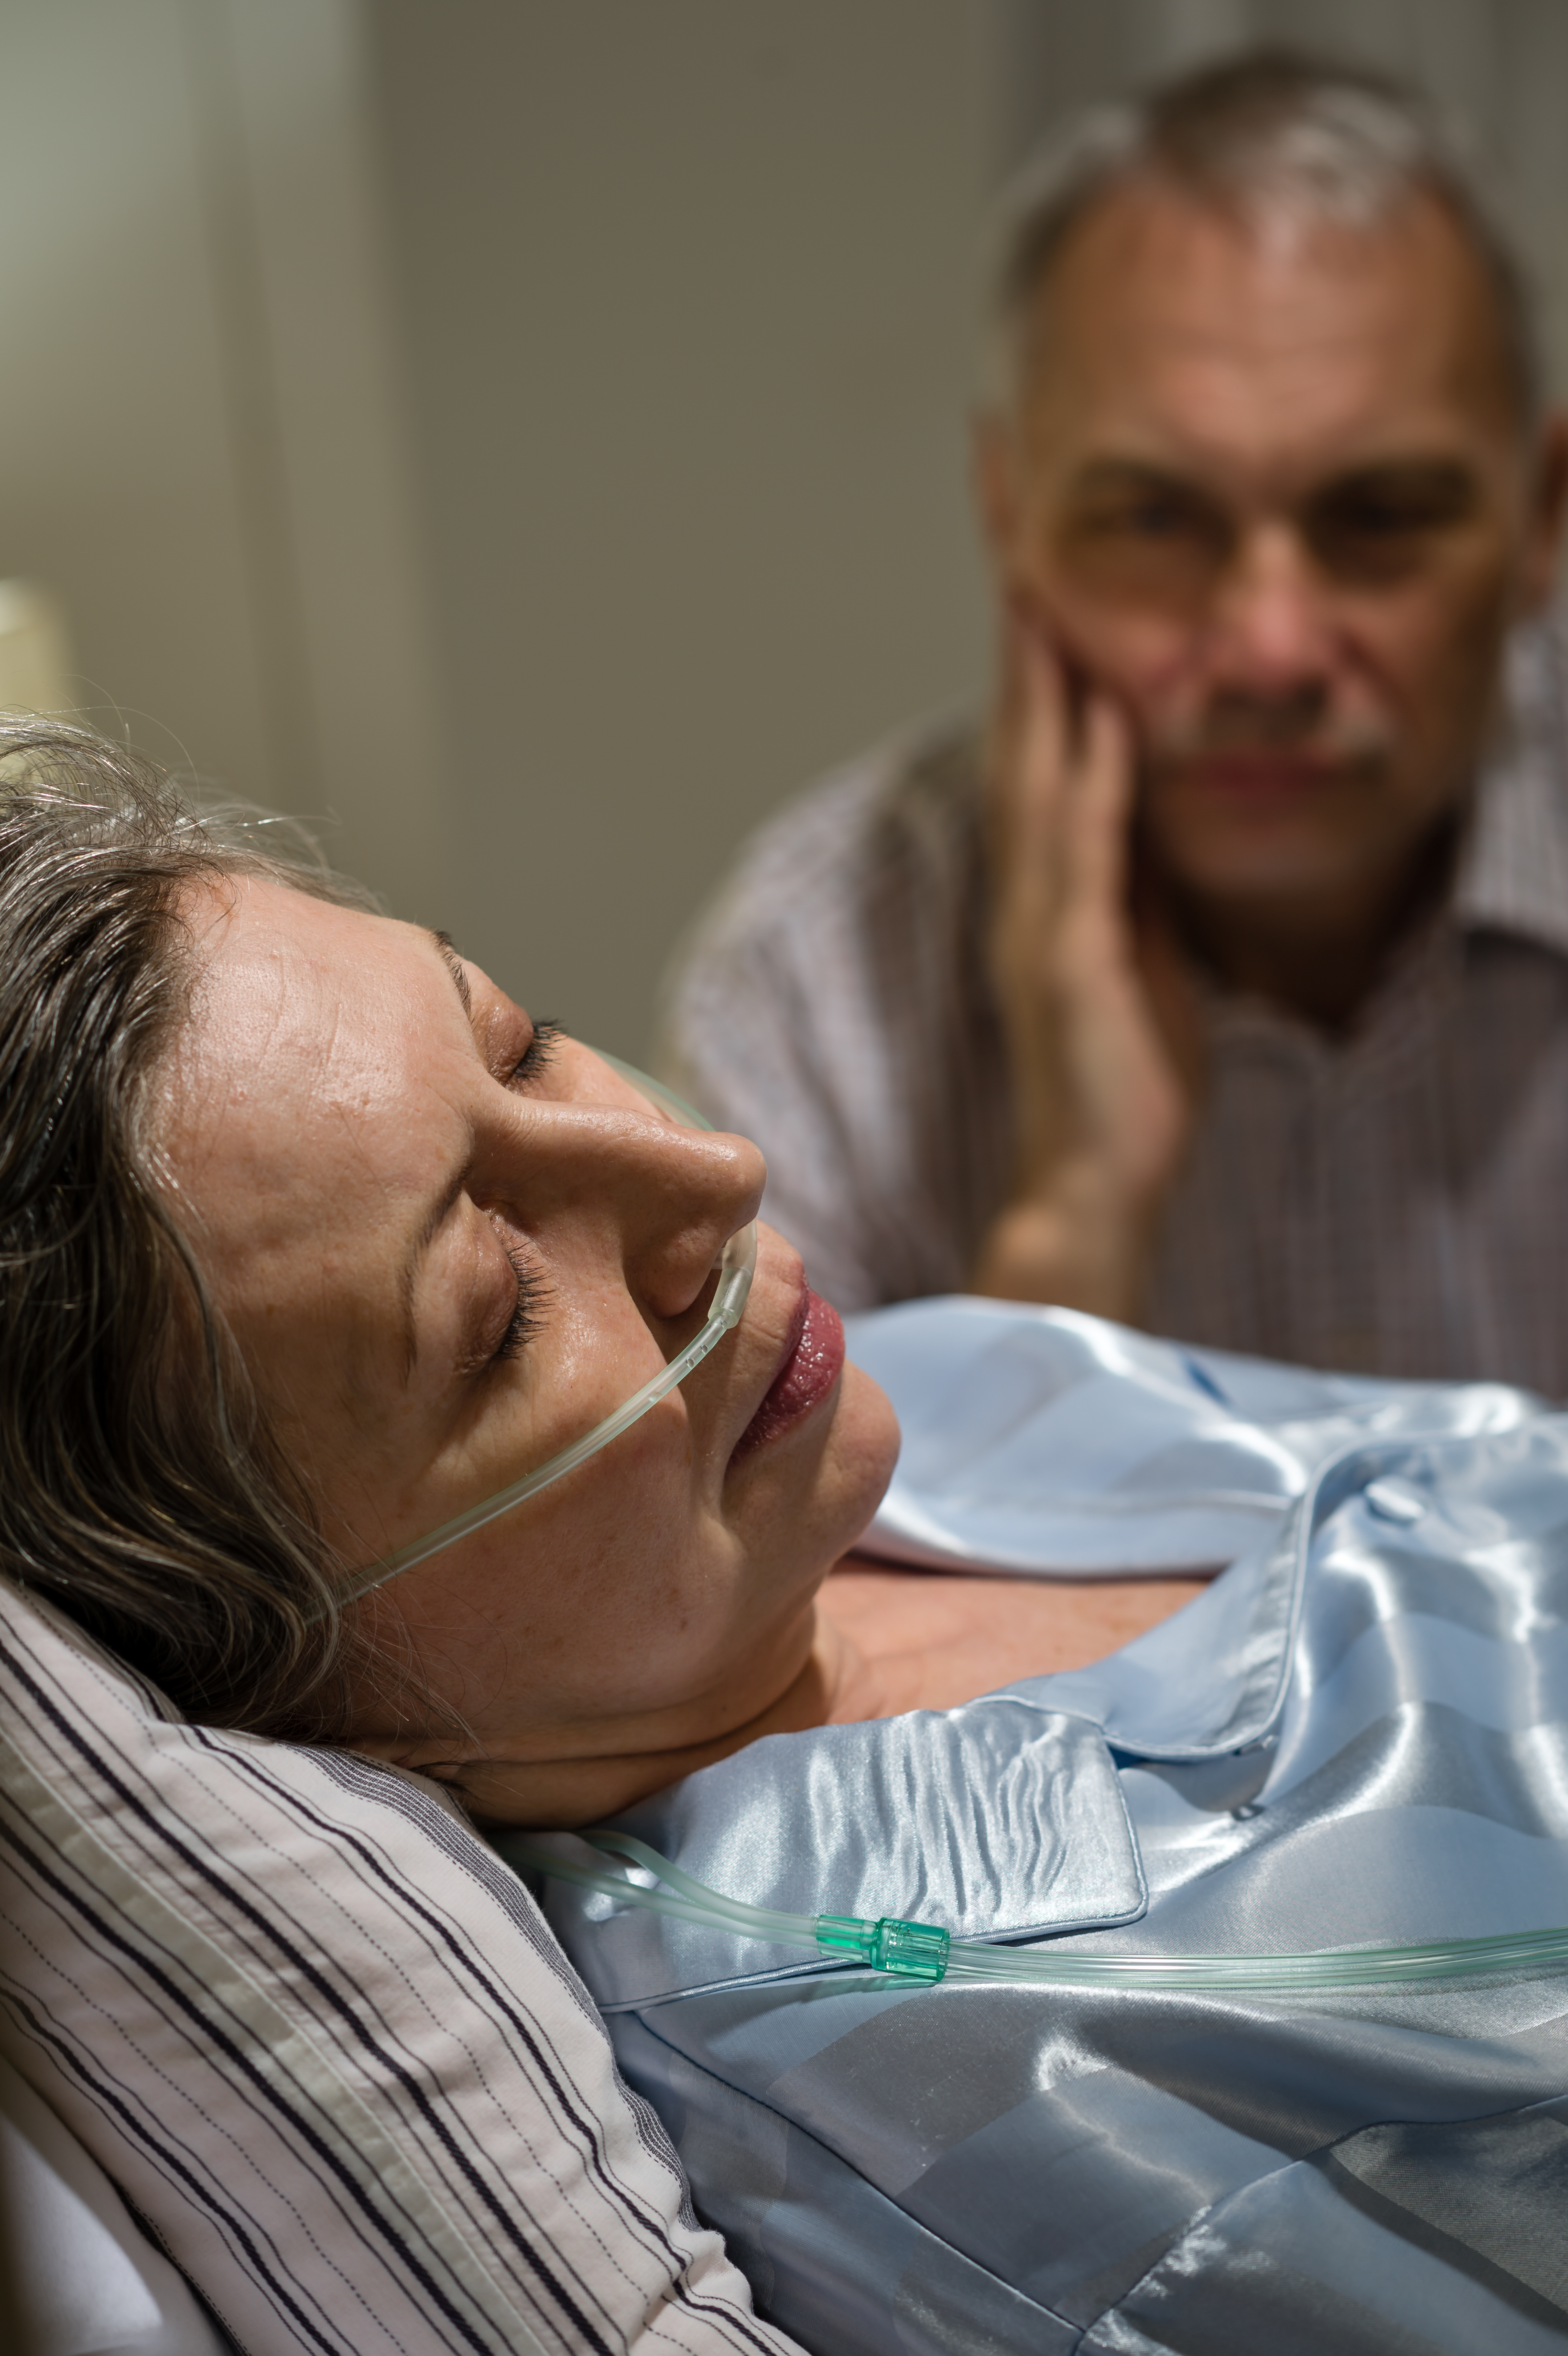 Ailing woman in hospital with a man beside her | Source: Shutterstock